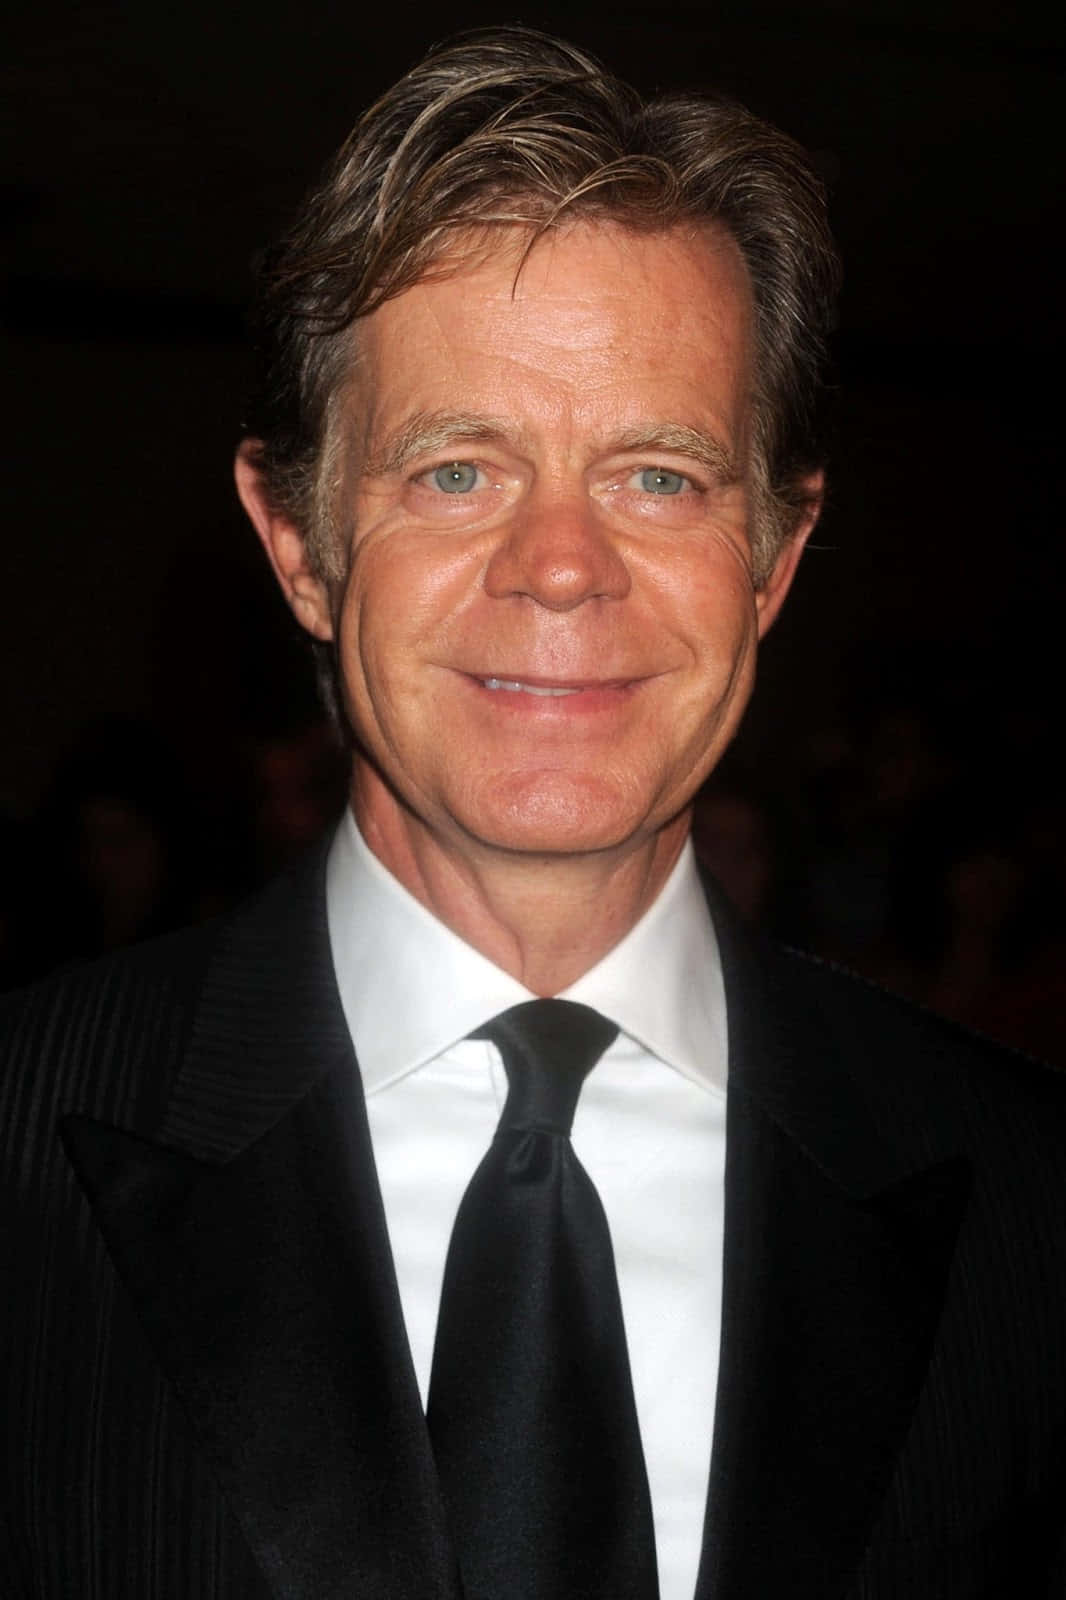 William H. Macy Smiling at an Event Wallpaper